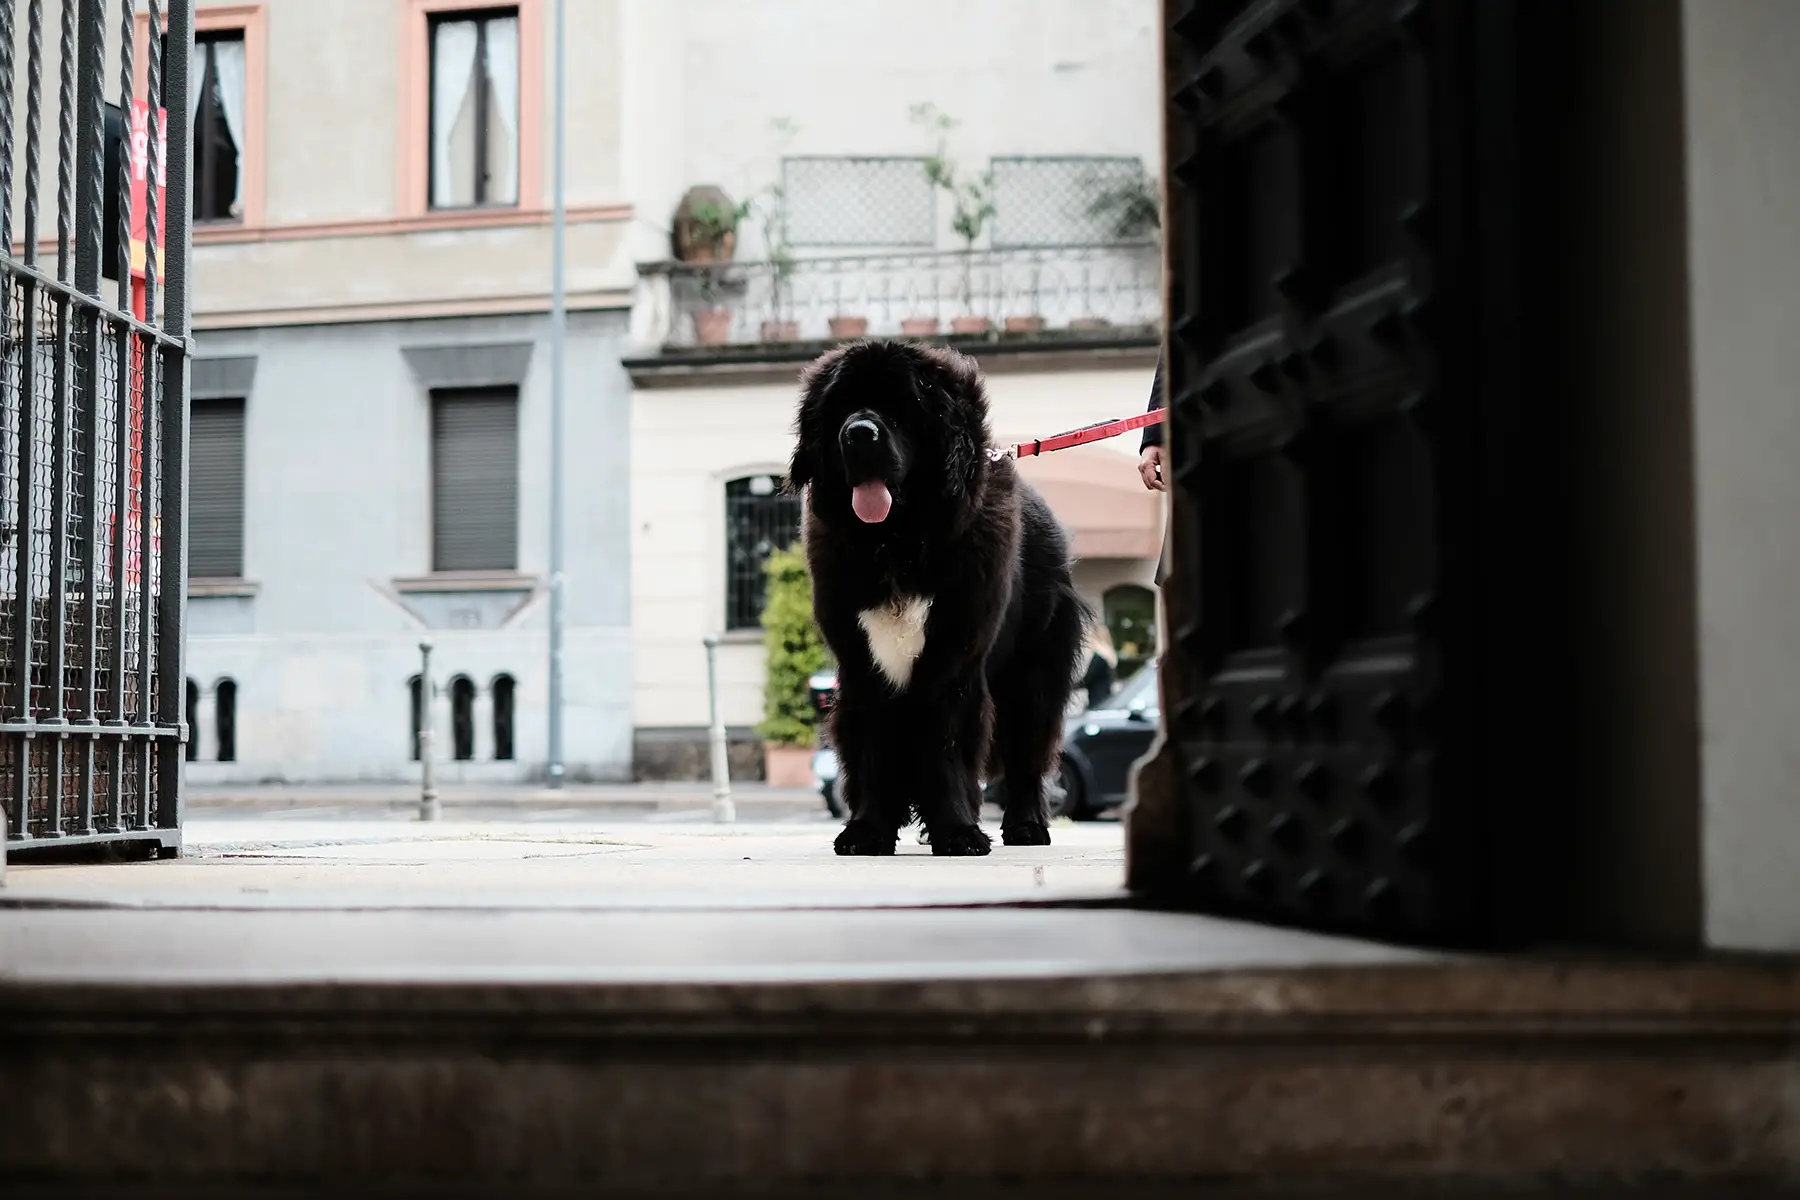 A dog standing in a doorway